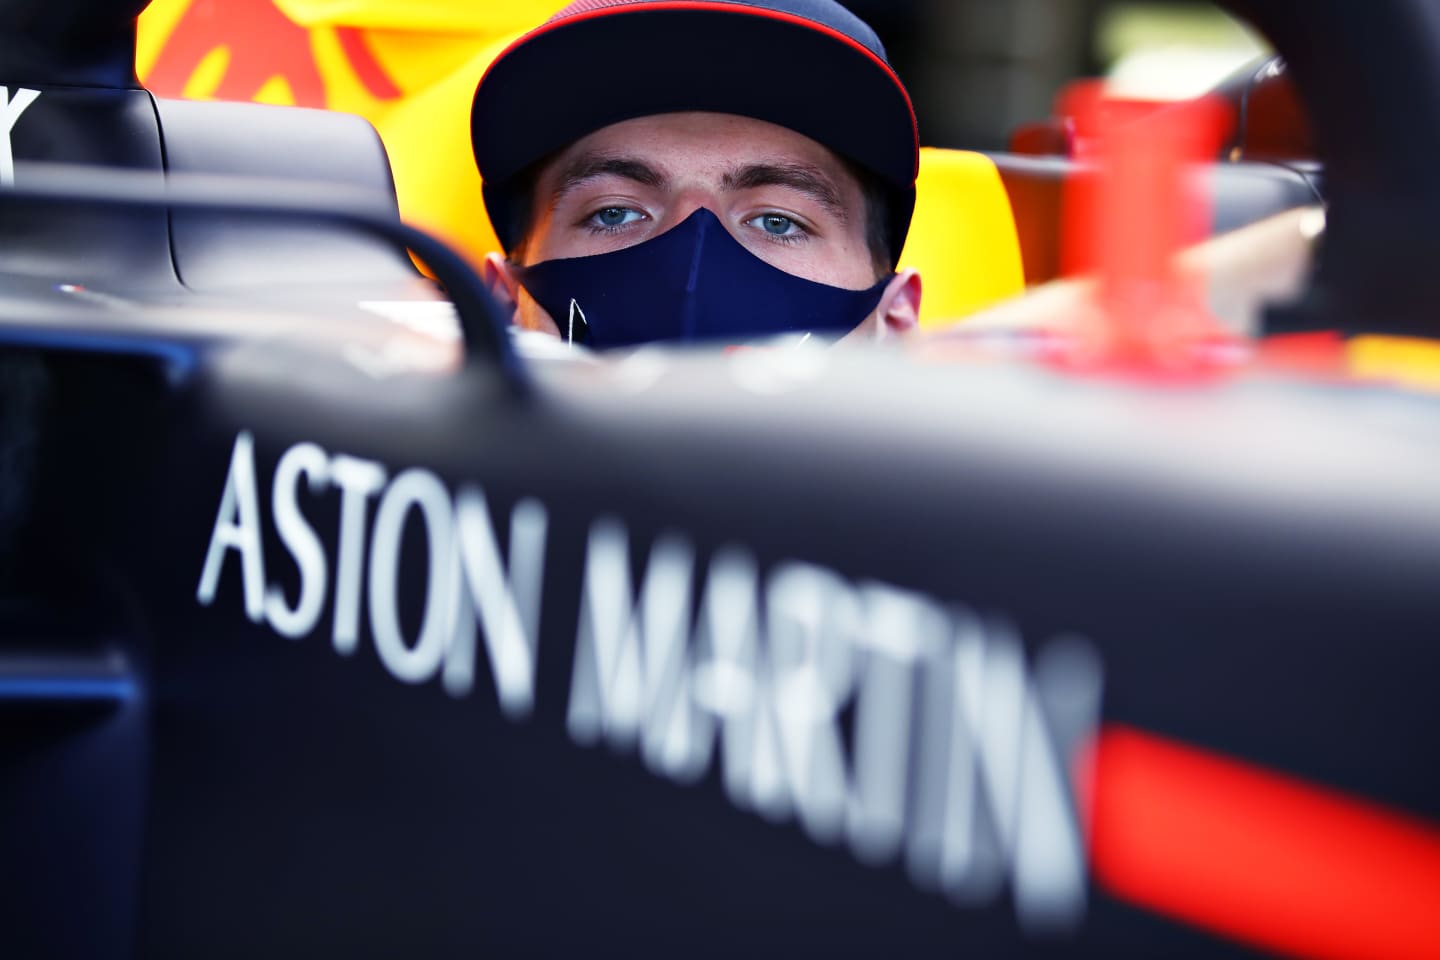 NORTHAMPTON, ENGLAND - JULY 30: Max Verstappen of Netherlands and Red Bull Racing sits in his car